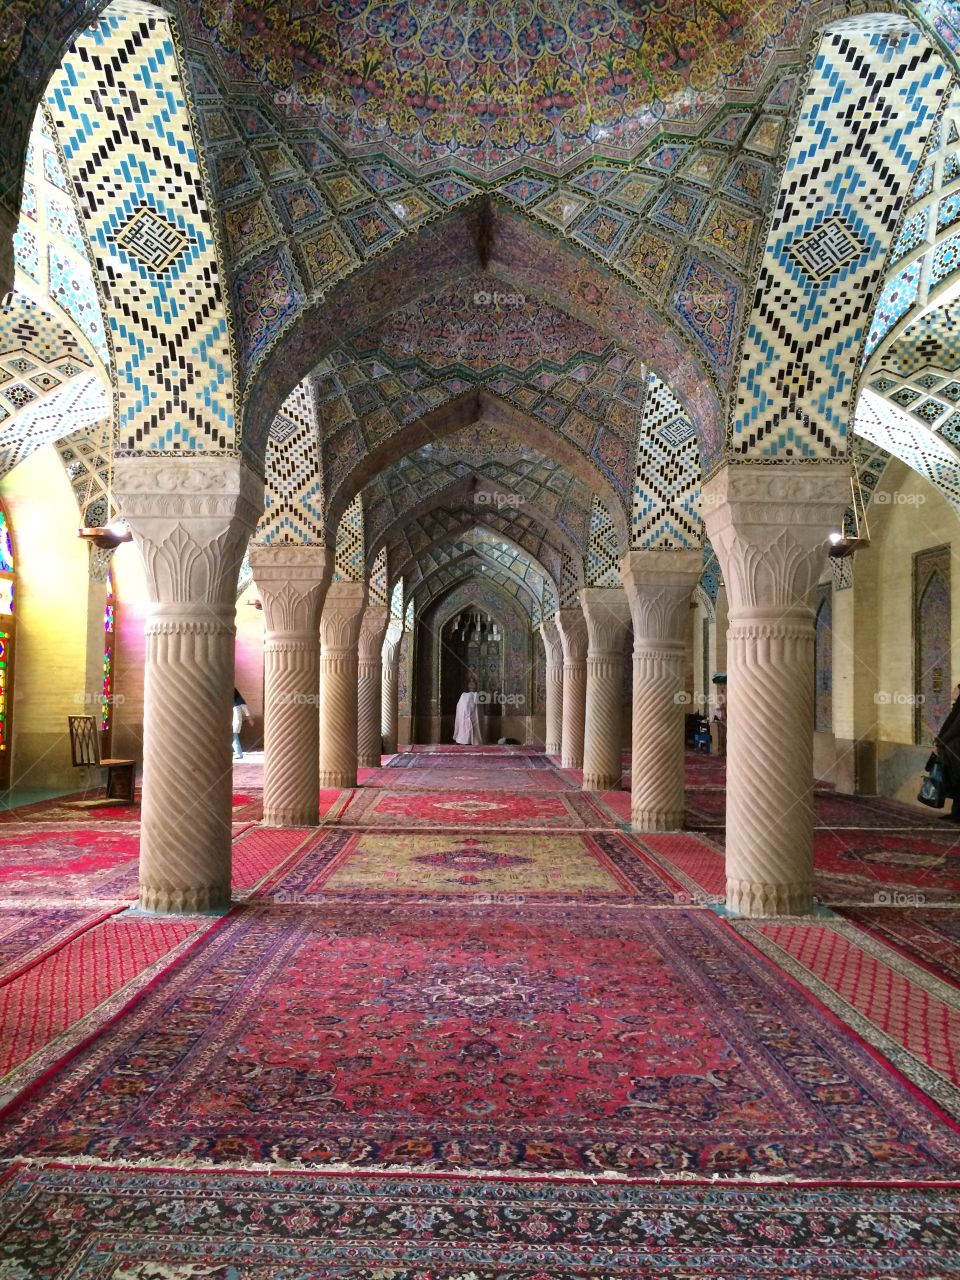 Old Mosque. Taken by iphone 5s in an old mosque in shiraz